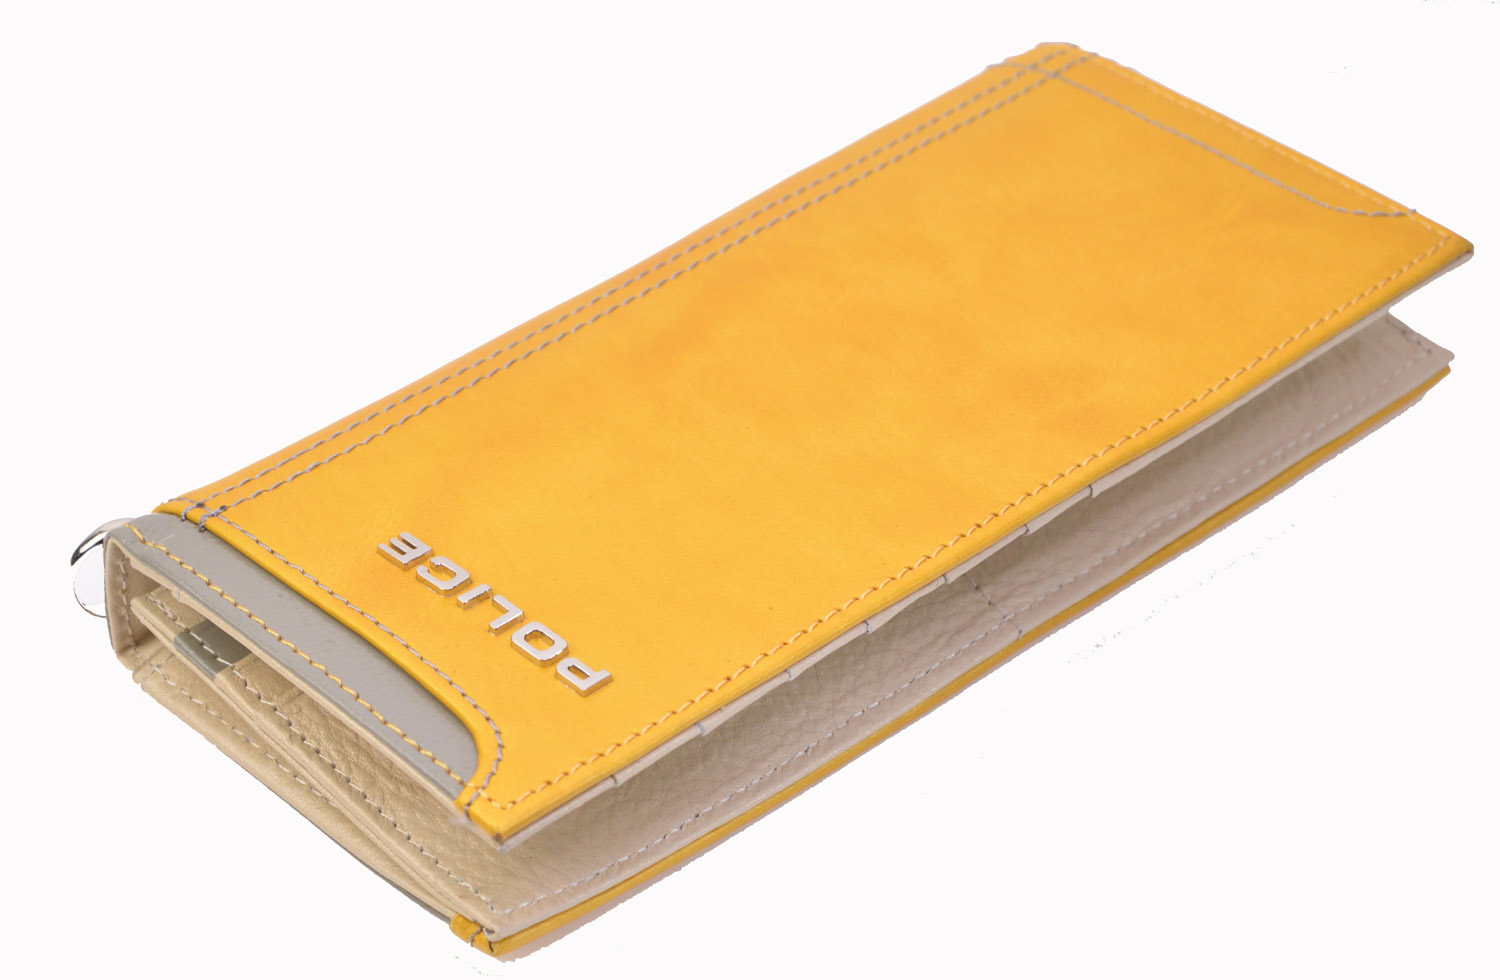 http://www.police.ne.jp/images/police-axis-wallet_yellow_103.jpg